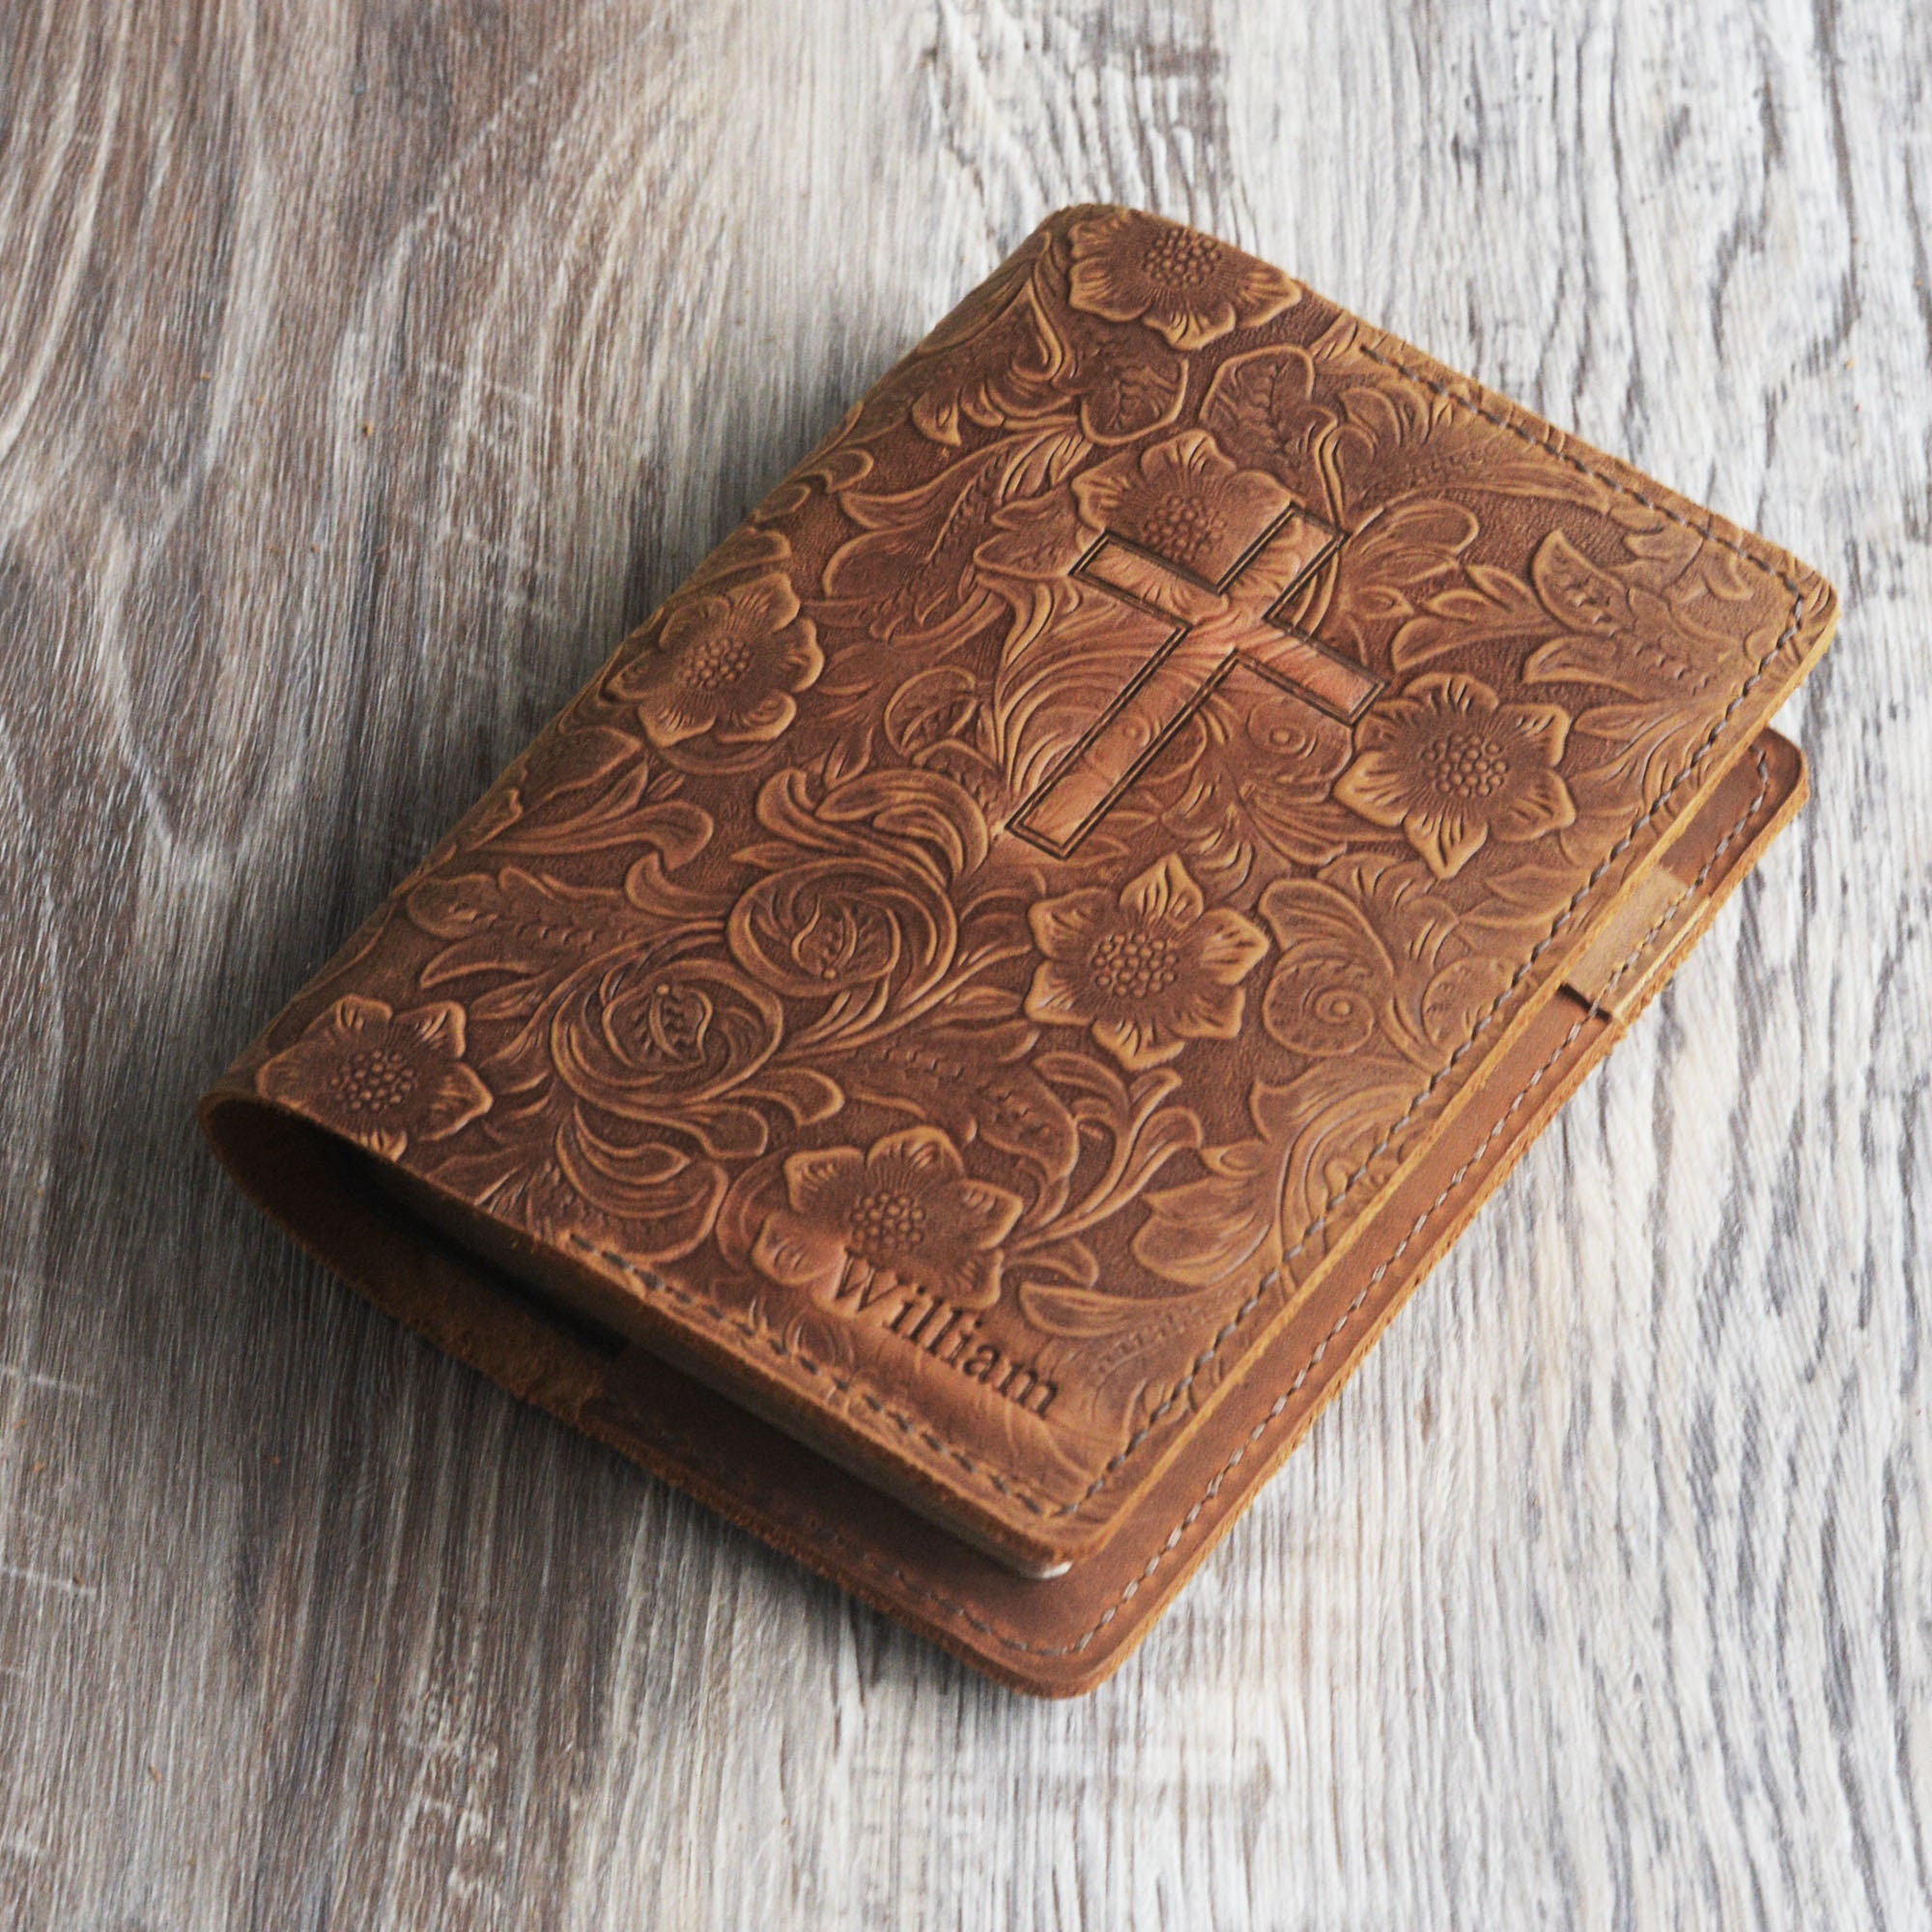 Custom Handmade Bison Leather Bible Cover, Book Cover, and Journal Covers.  Handle carry Bison leather Bible or book cover. Carries like a Purse. Made  in the USA. Customizable sizes available.